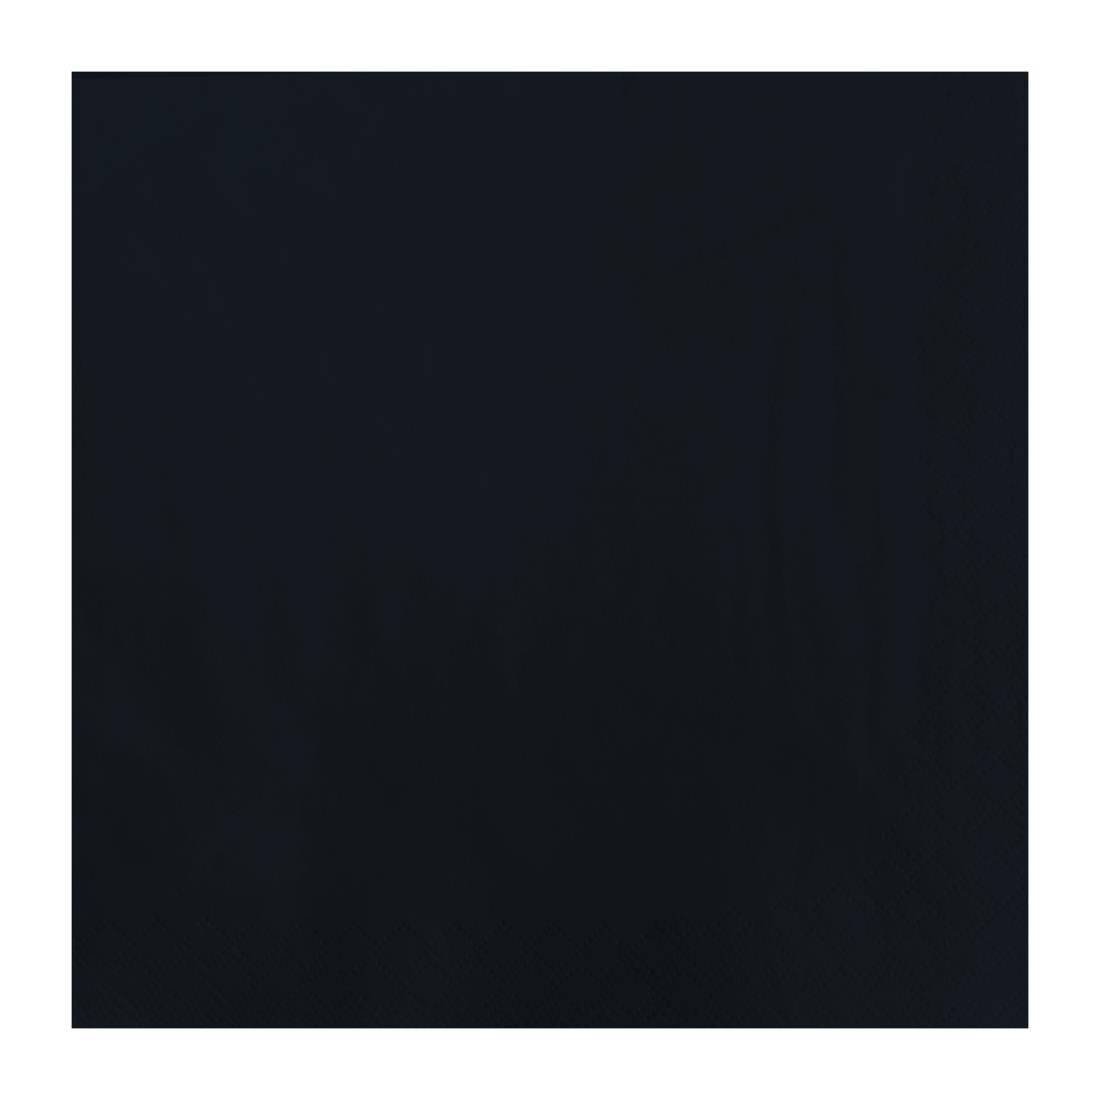 FT327 Fasana Lunch Napkin Black 33x33cm 2ply 1/4 Fold (Pack of 1500) JD Catering Equipment Solutions Ltd